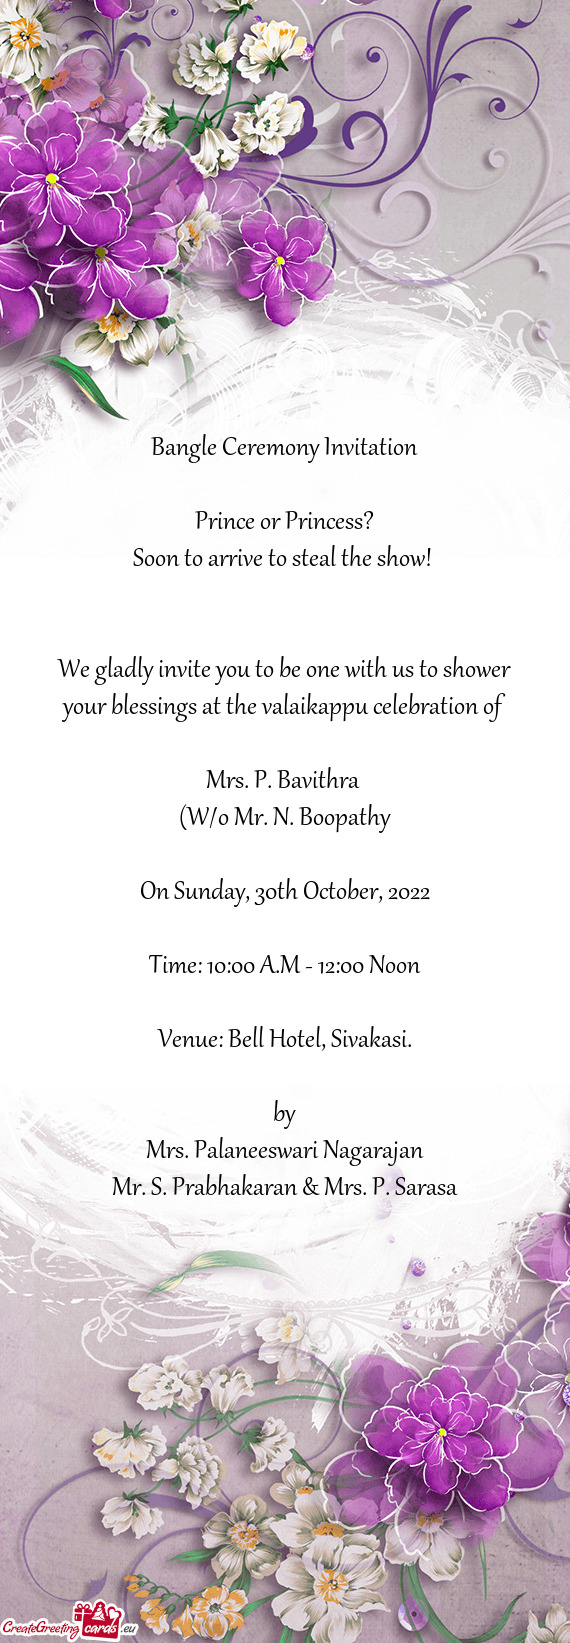 We gladly invite you to be one with us to shower your blessings at the valaikappu celebration of